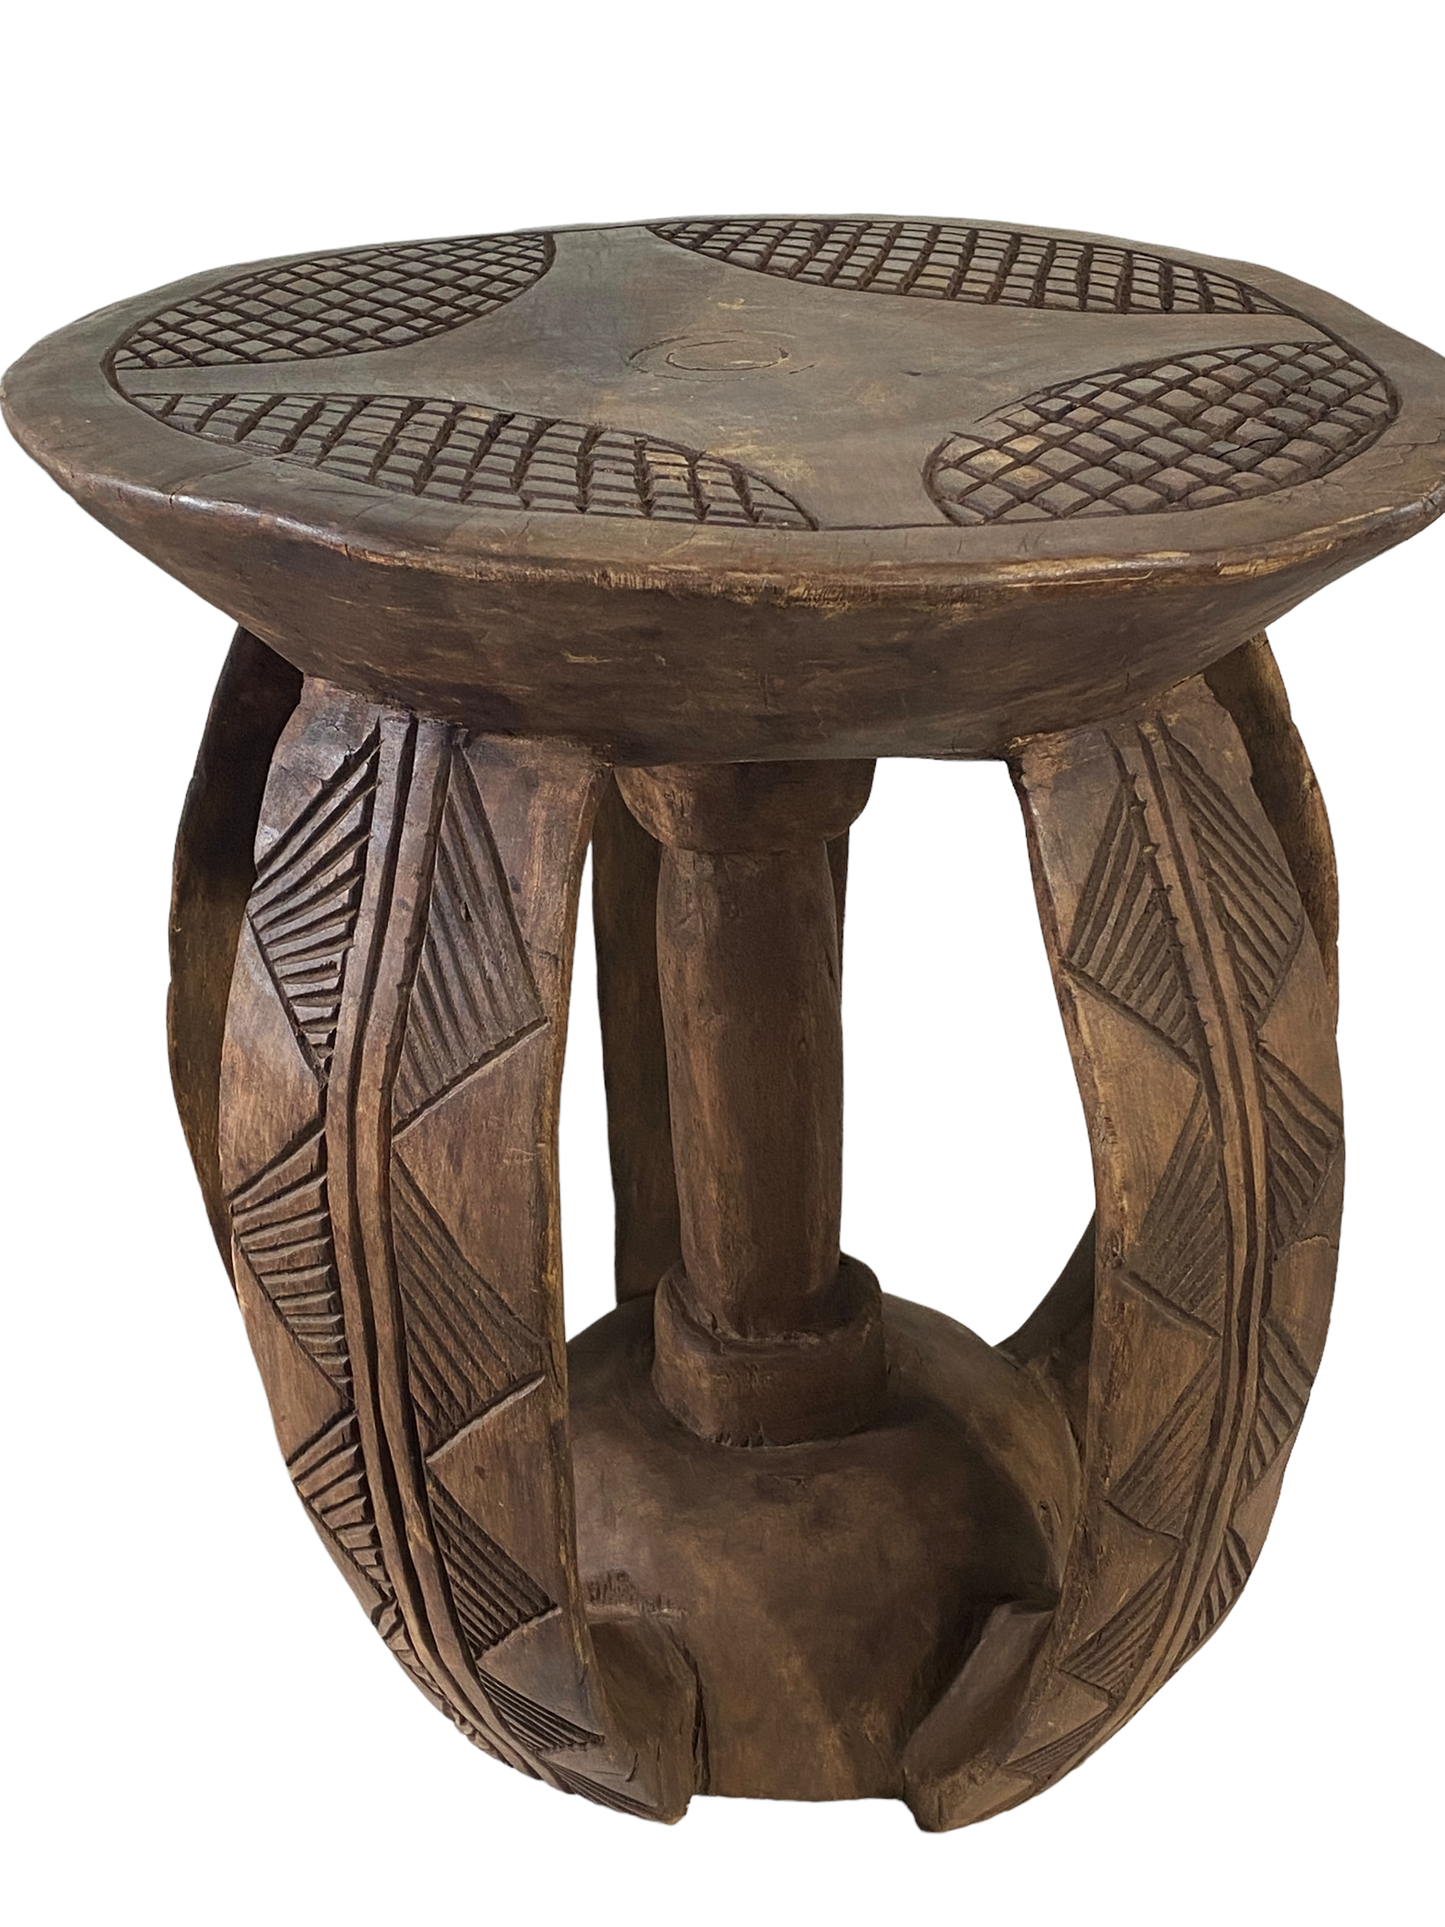 #5189 LG African  Baga Stool /Table  Guinea-Bissau  18" H by 17" W